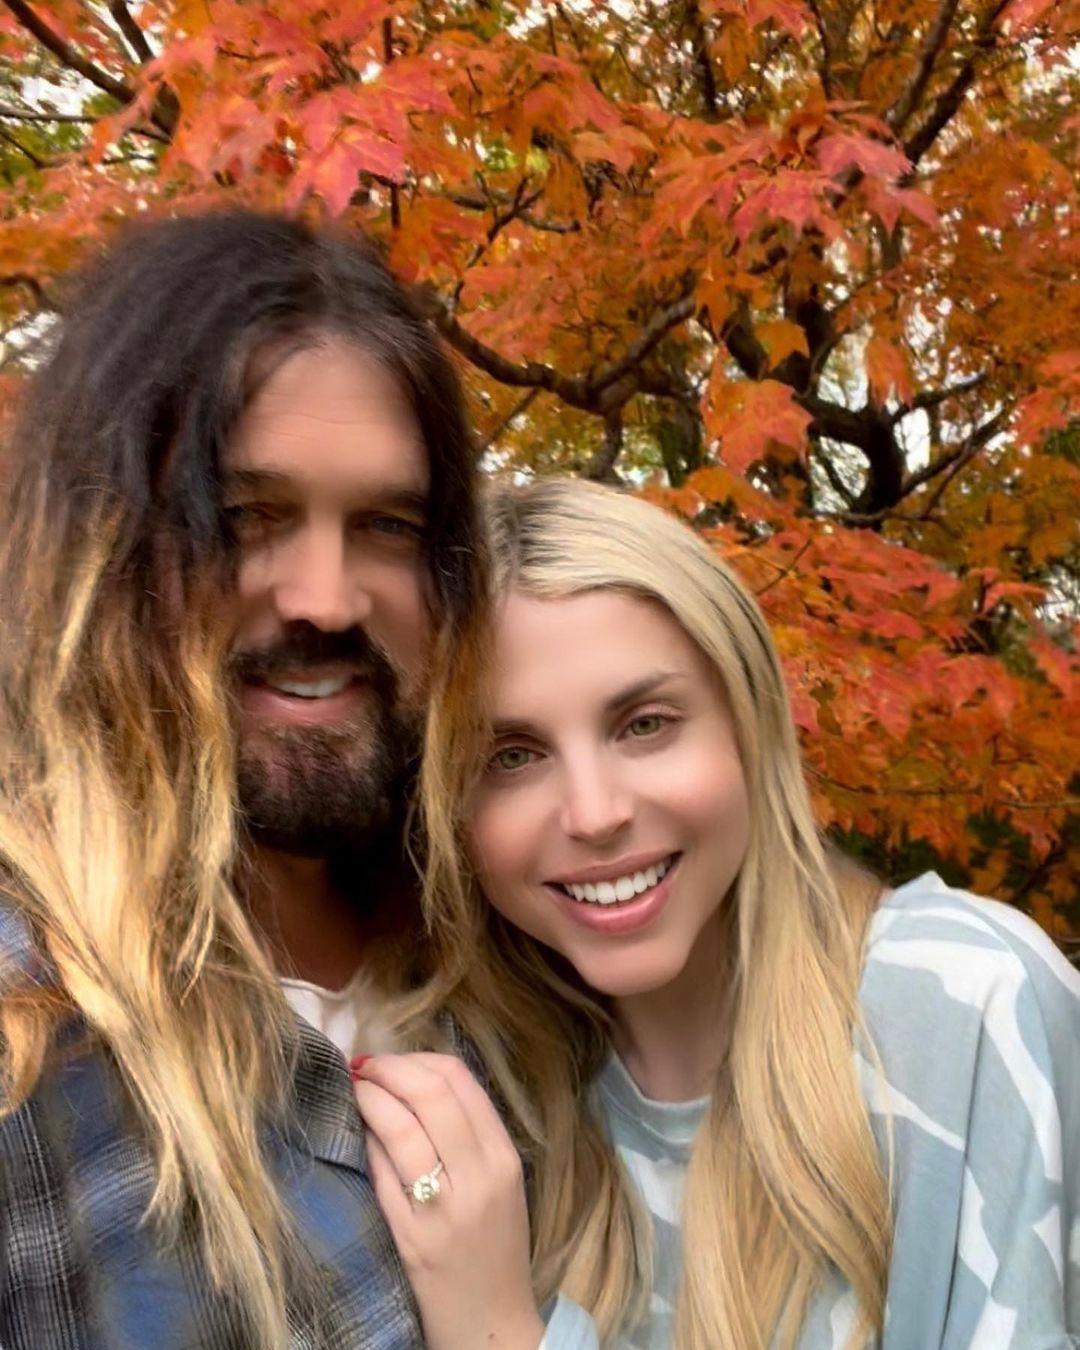 Billy Ray Cyrus Confirms Engagement with Firerose